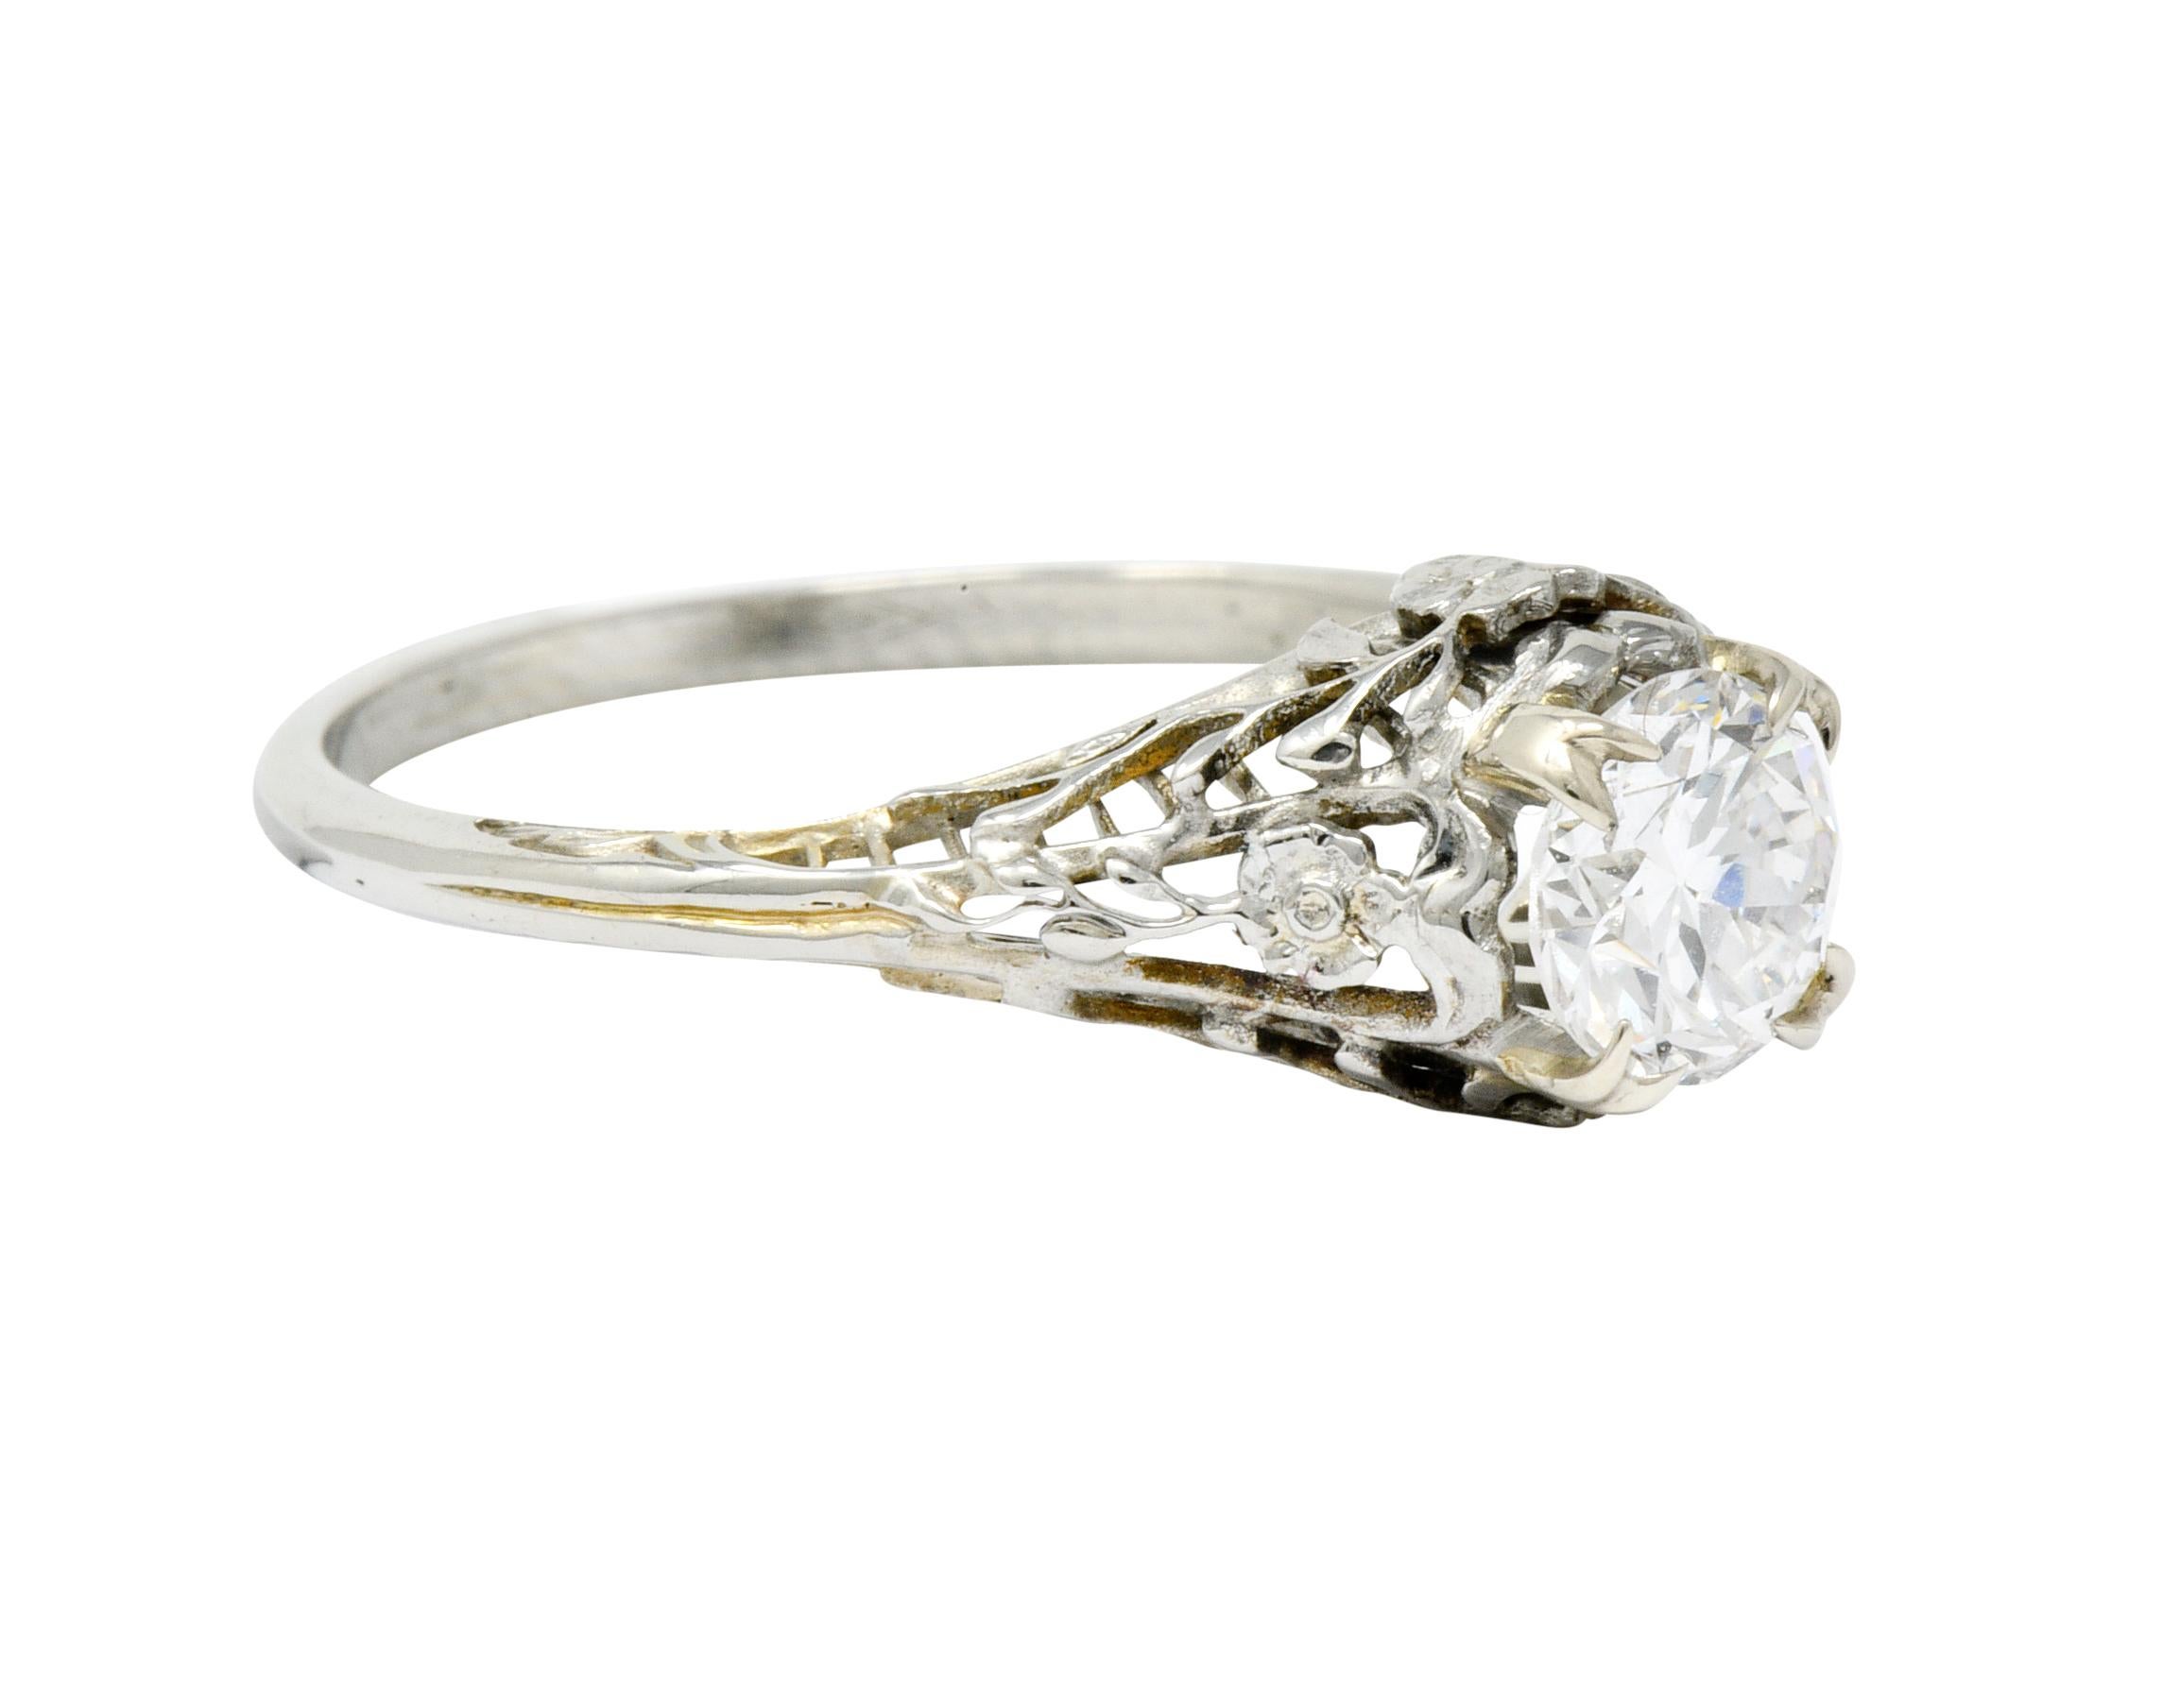 Centering a transitional cut diamond weighing 0.73 carat, F color with VS2 clarity

Prong set in a pierced decorative mount featuring a floral motif at each cardinal point

Completed by vine-like foliate filigree throughout shoulders and